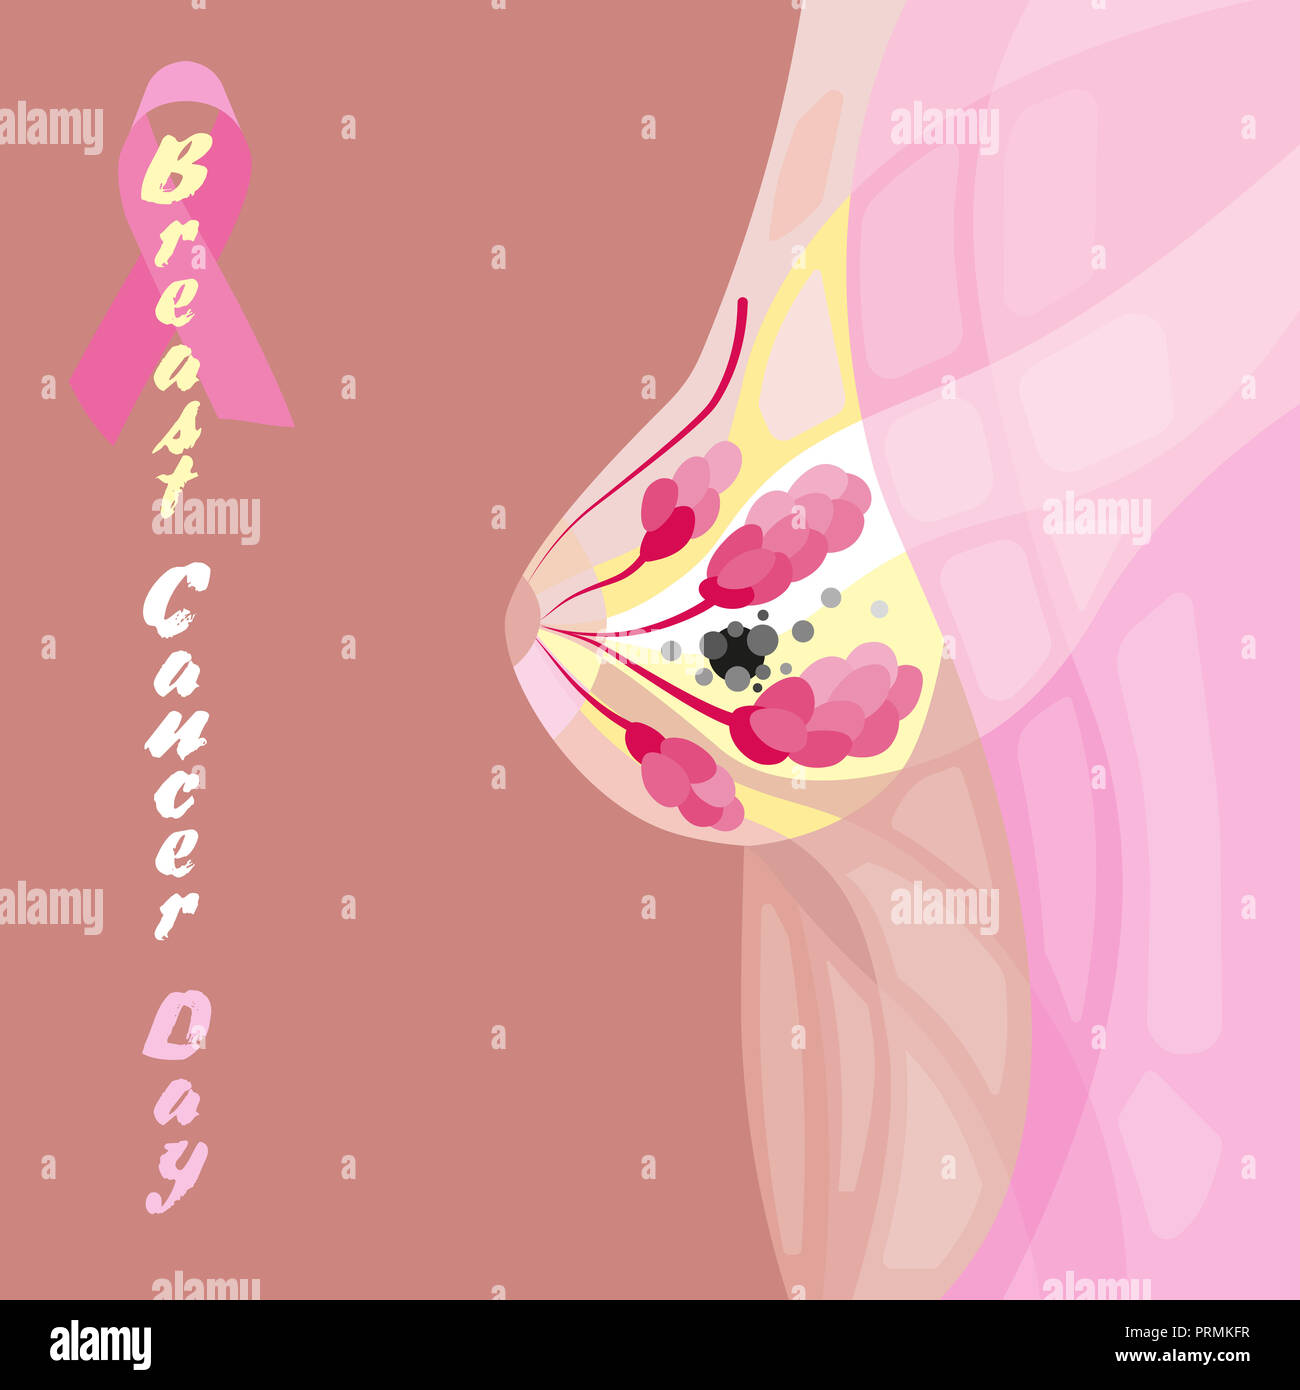 Breast cancer october awareness month campaign poster ribbon sign and woman silhouette over pink cause background. Stock Photo